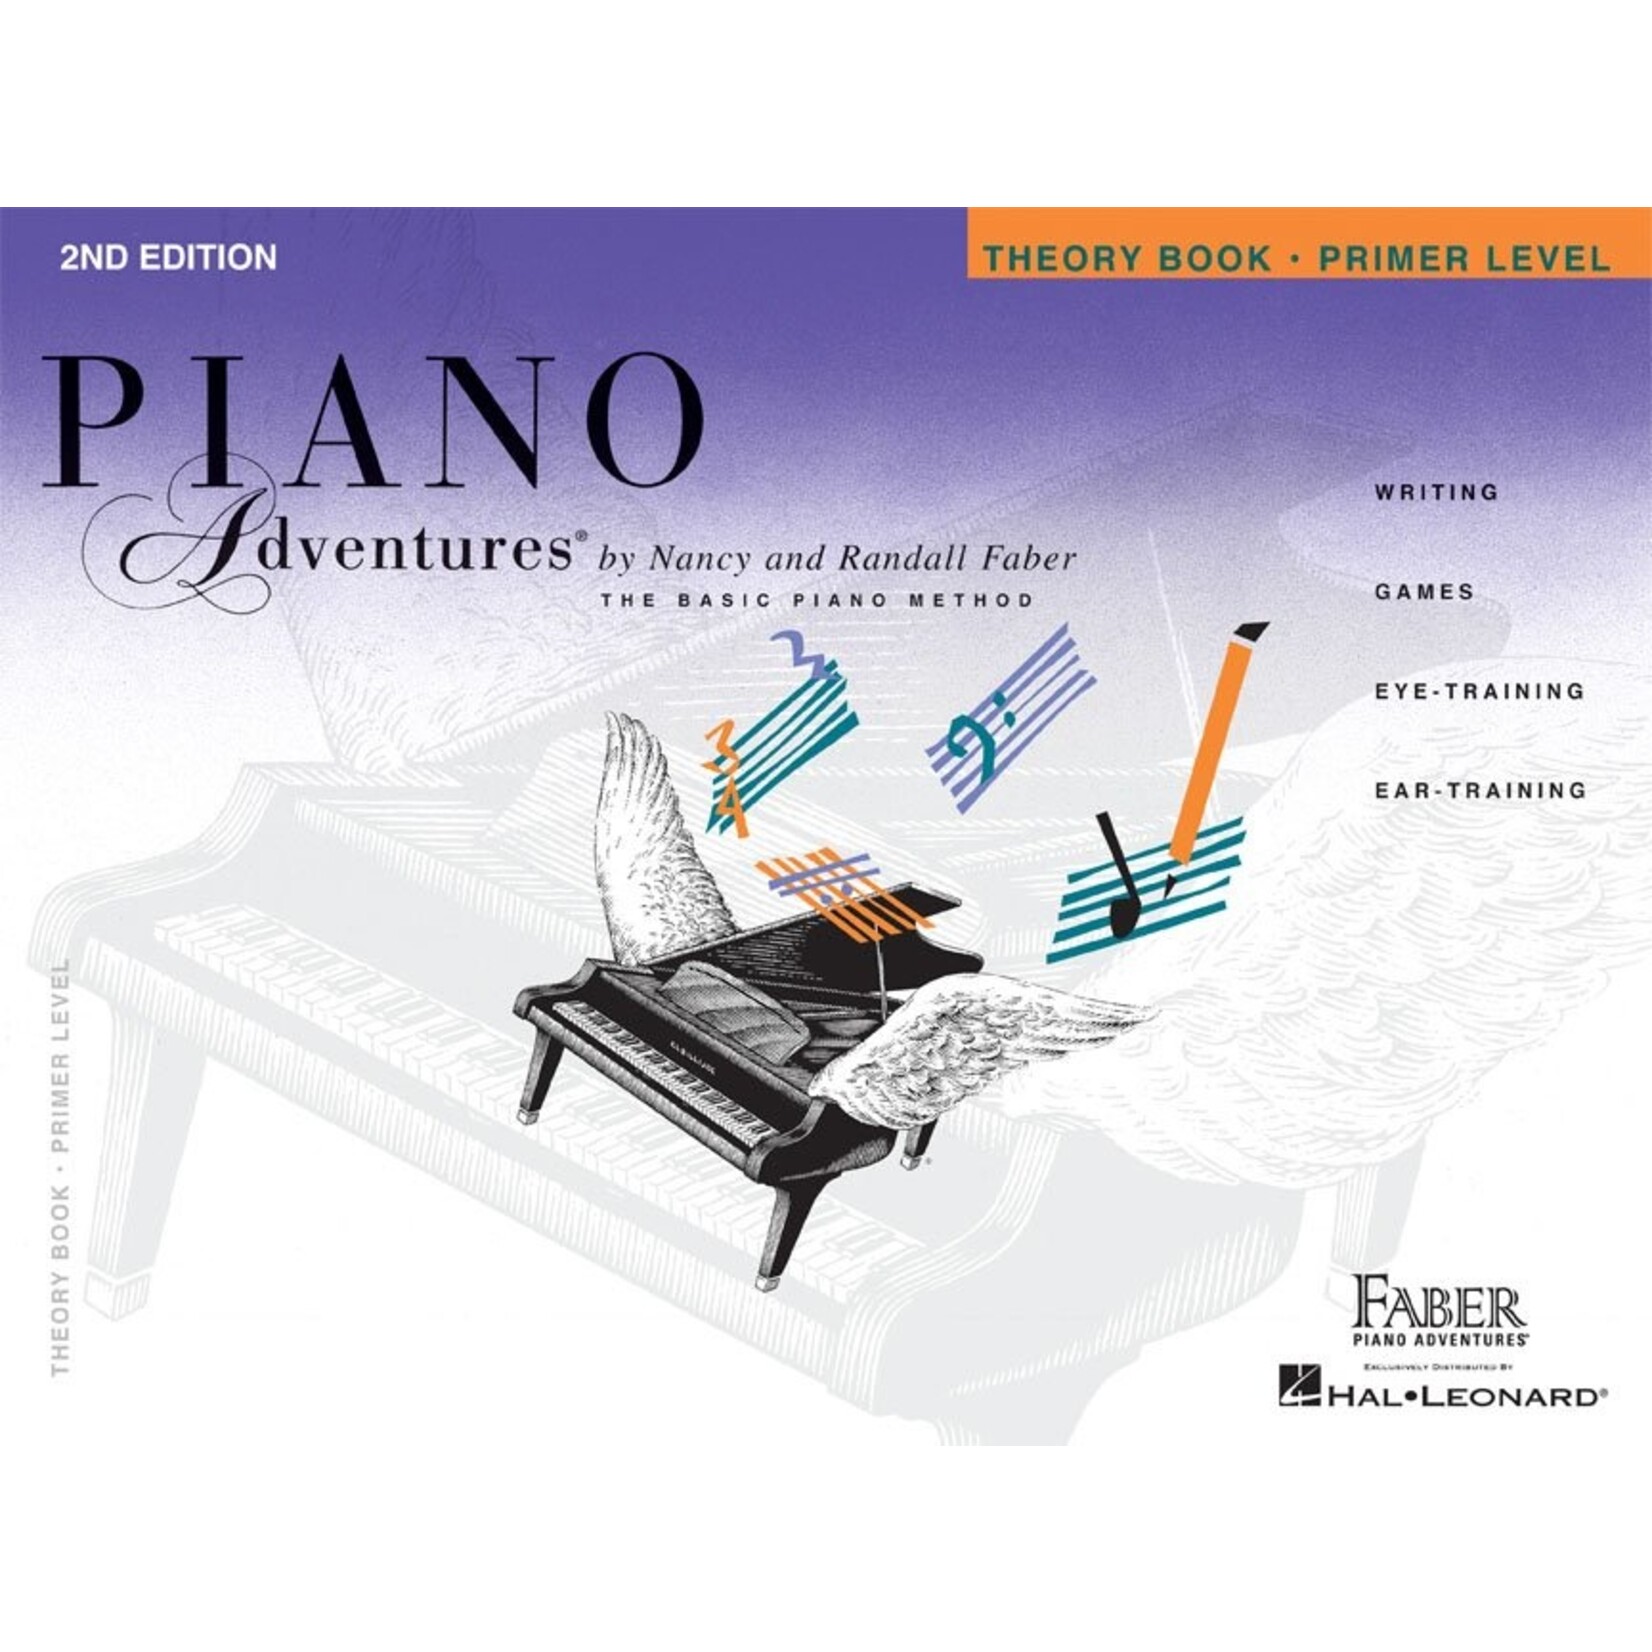 Faber Piano Adventures Primer Level - Theory Book (2nd Edition)